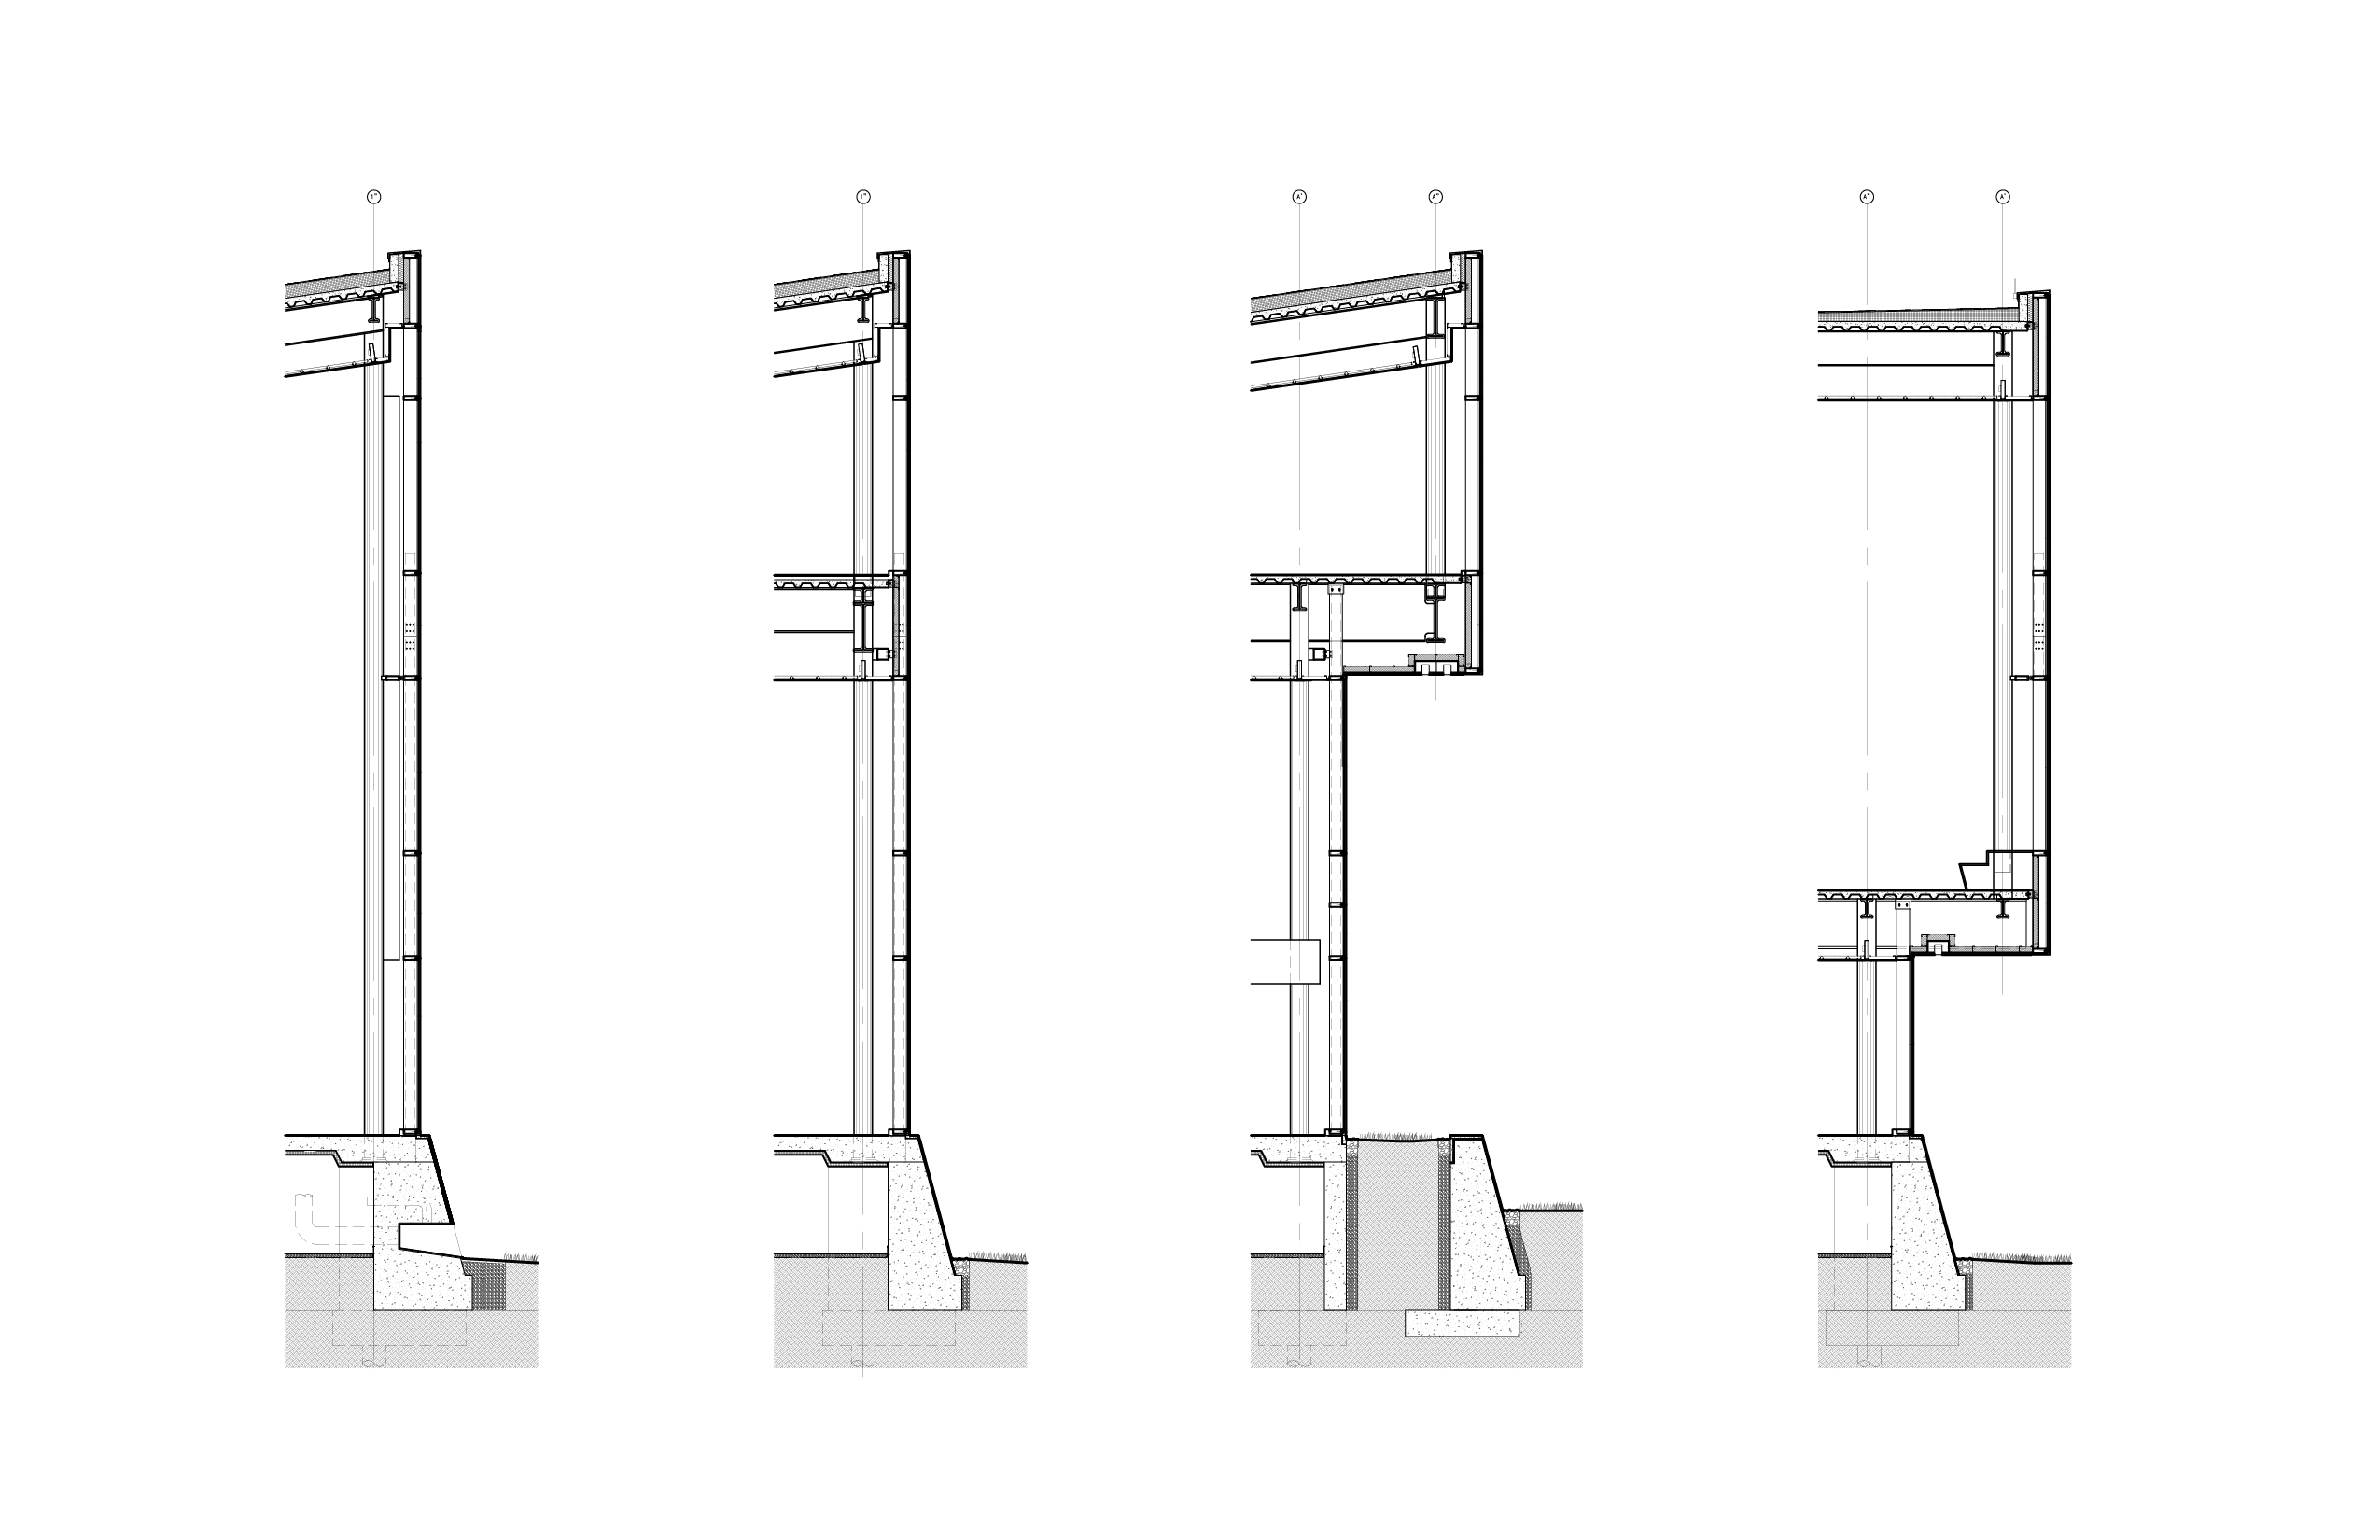 Section of the facade system consisting of prefabricated, four-sided structural silicone glazing cassette system